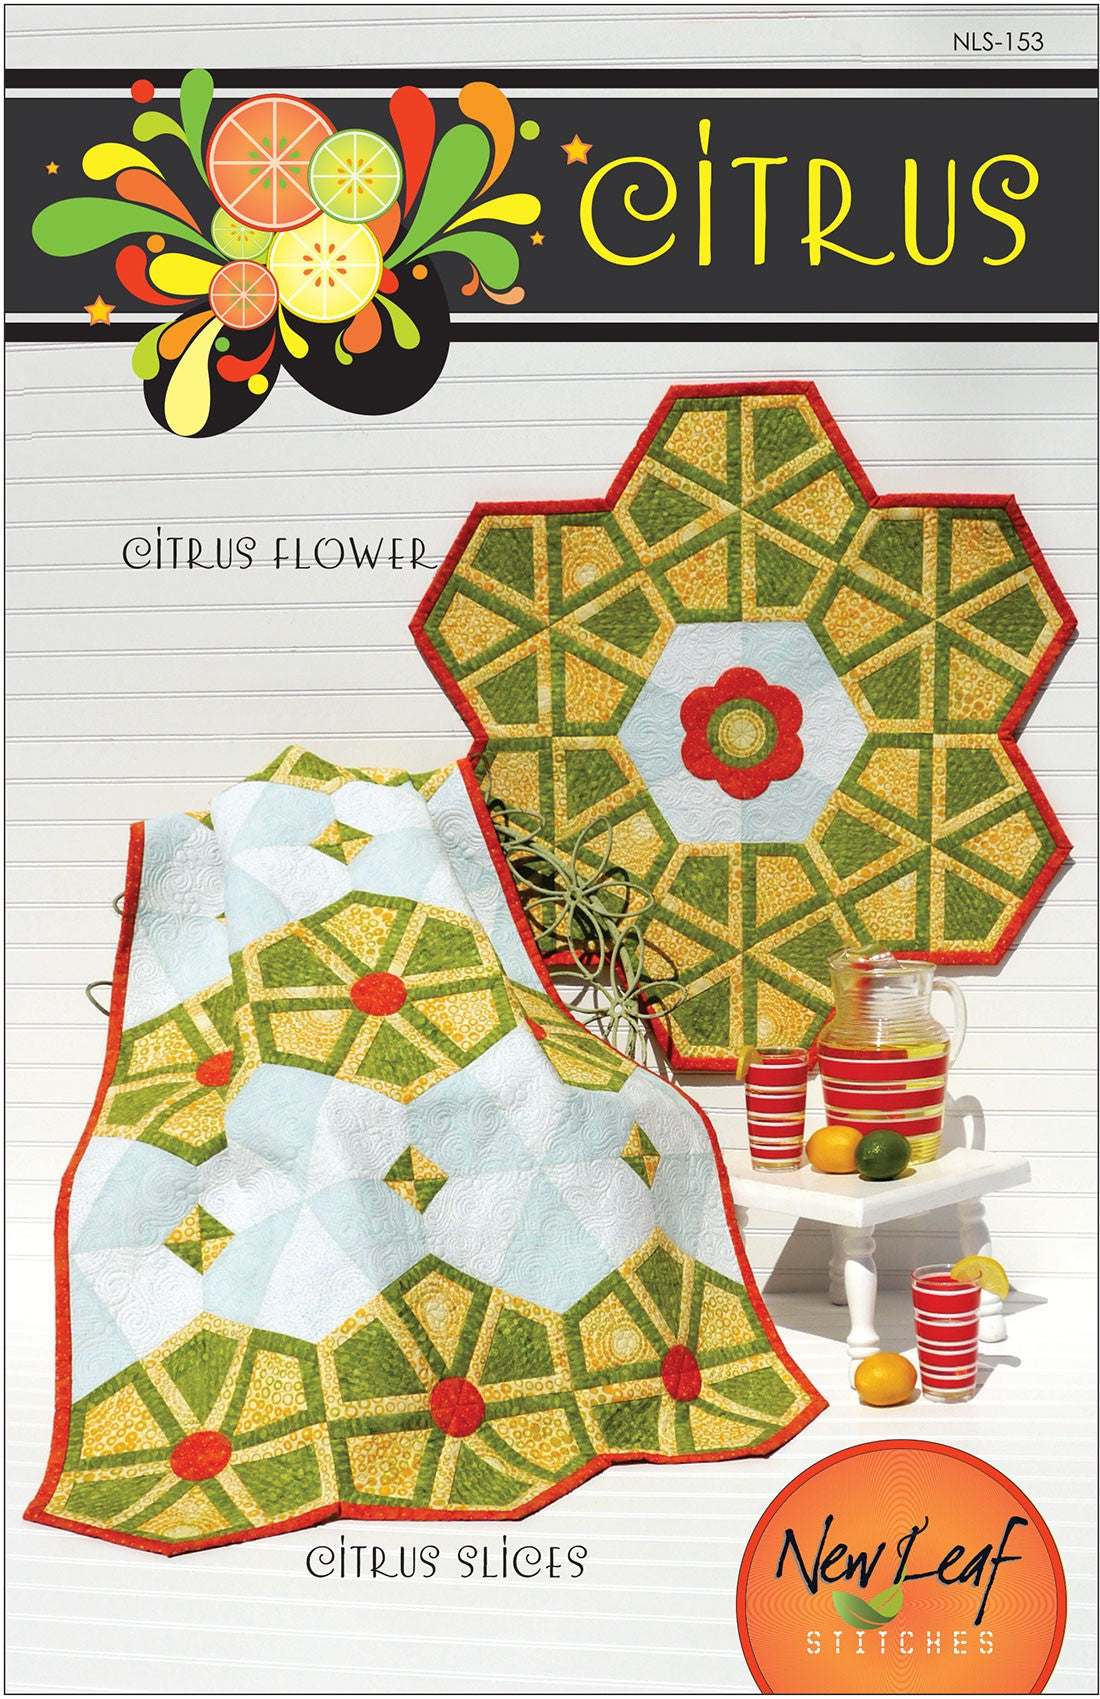 Citrus: Two Refreshing Table Toppers Quilt Pattern by Kari Carr for New Leaf Stitches